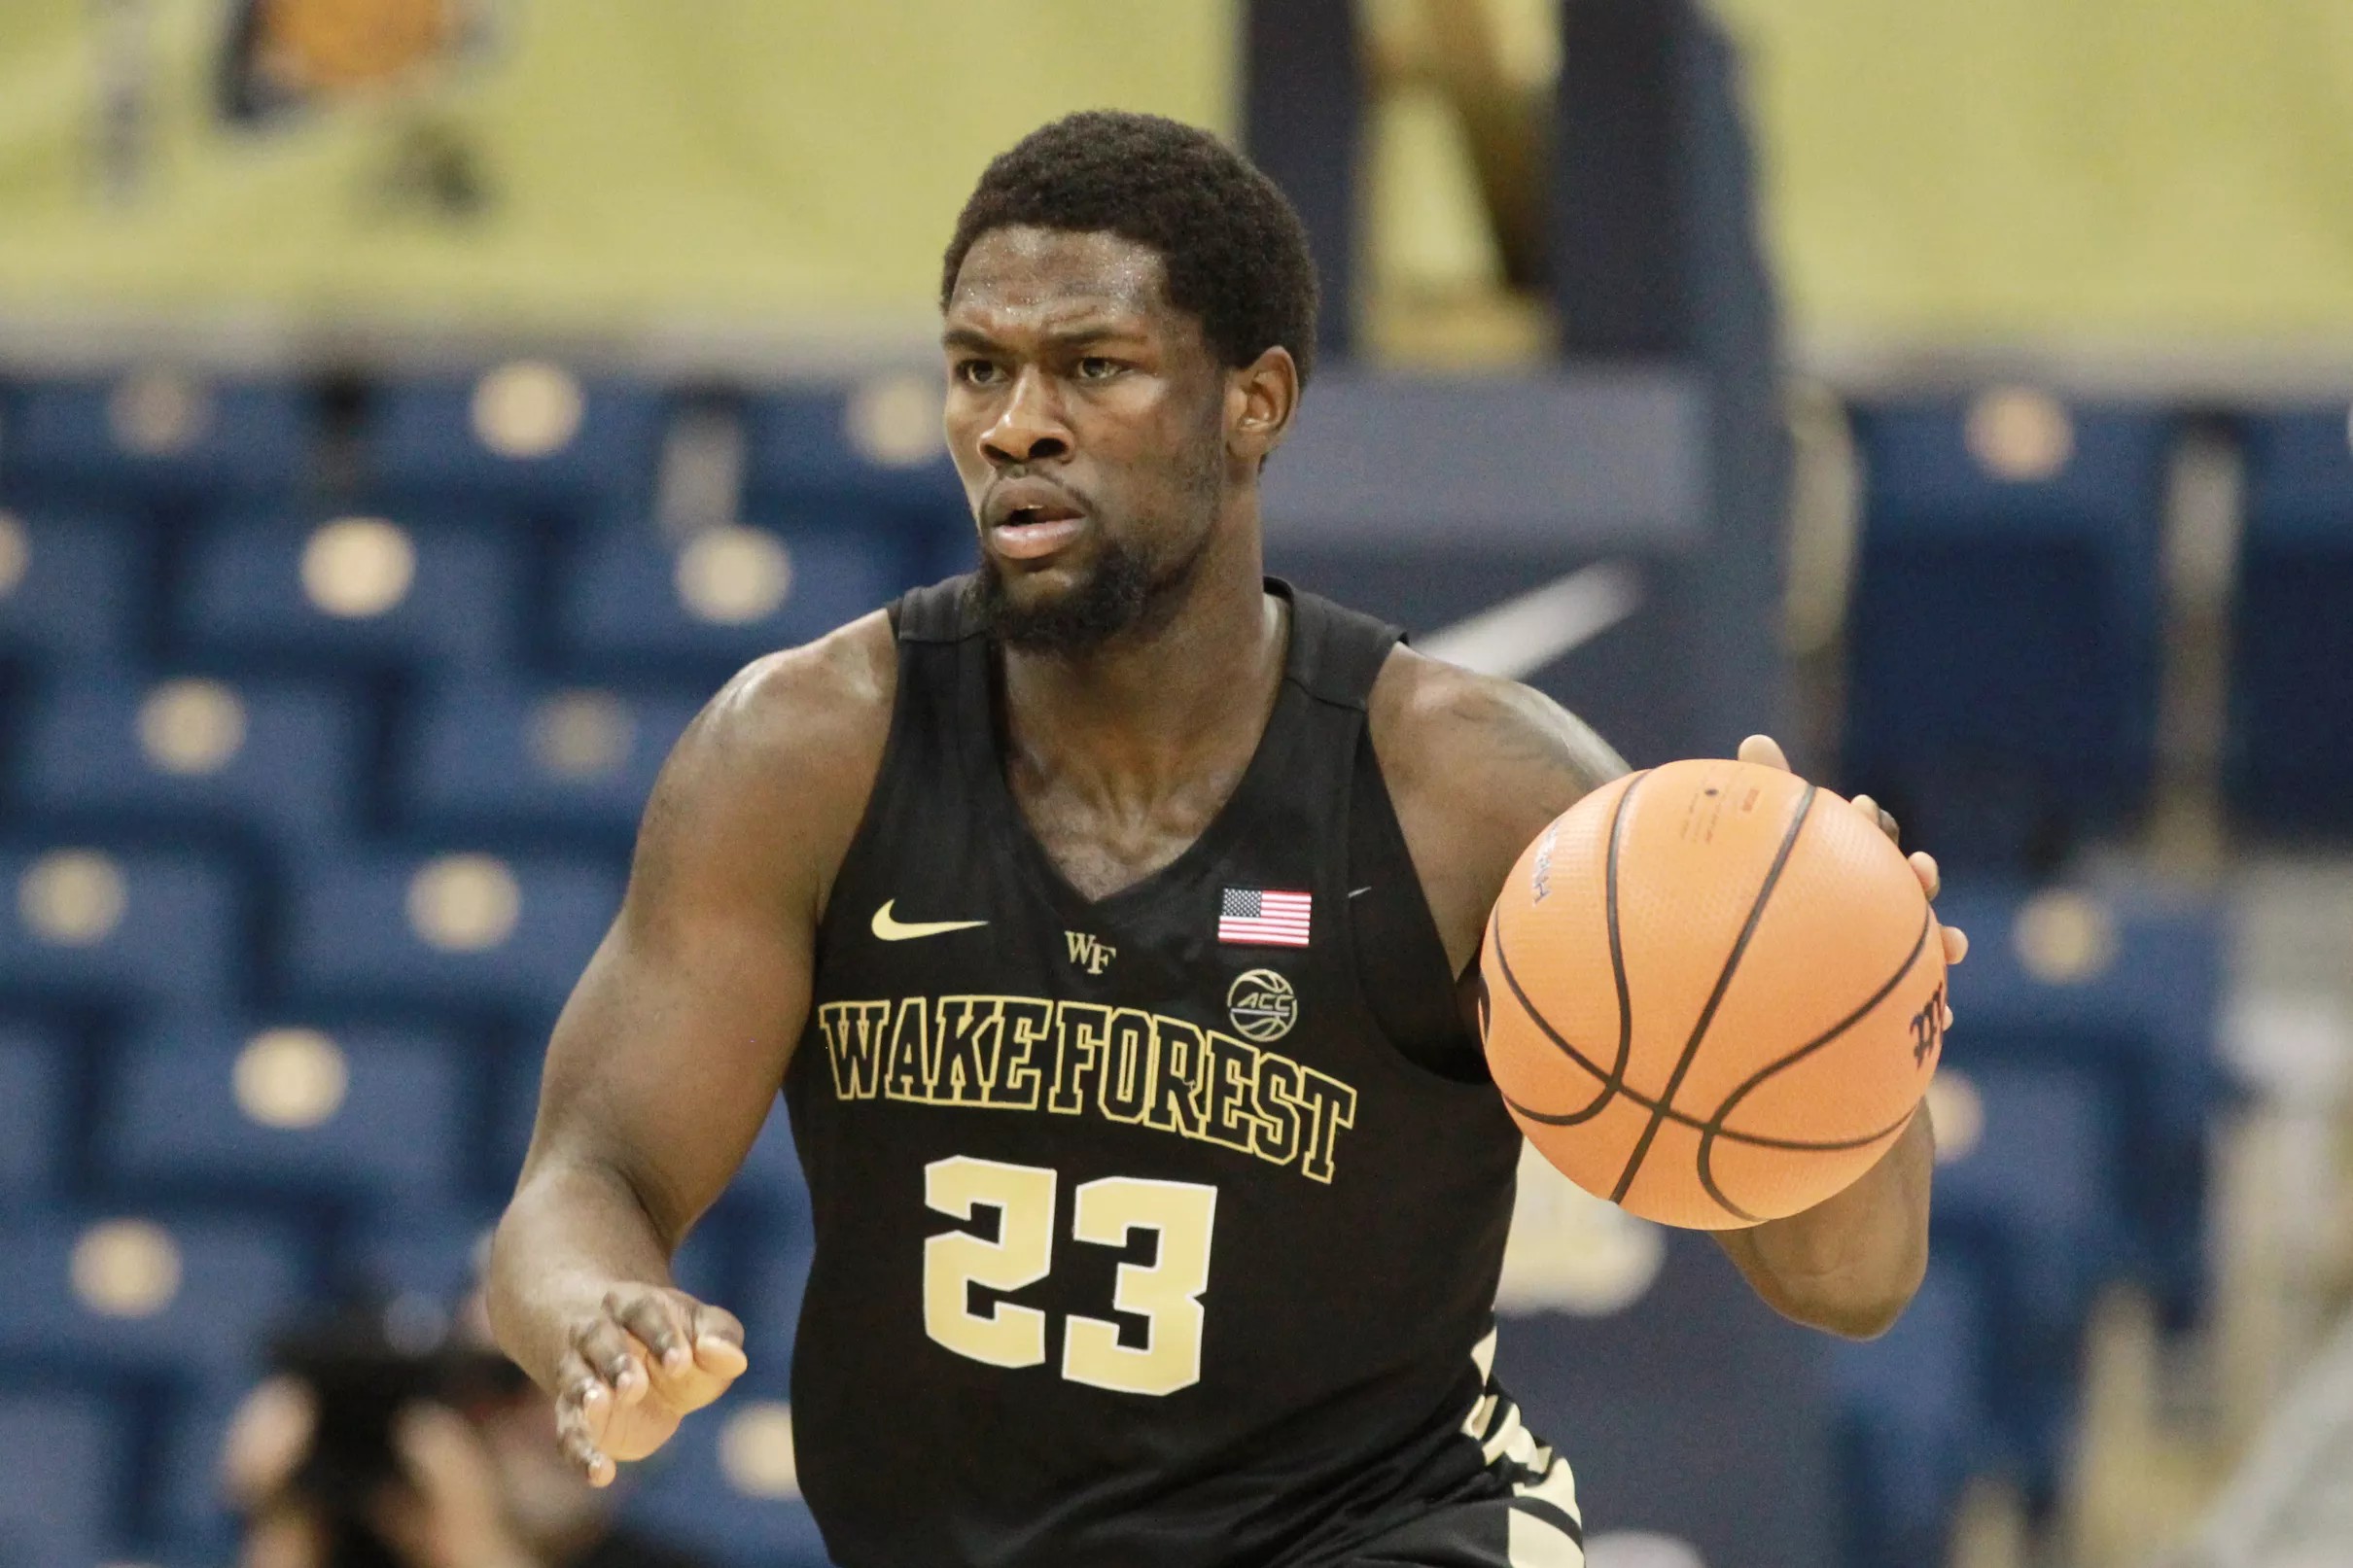 Wake Forest Basketball Out of Conference Schedule Breakdown